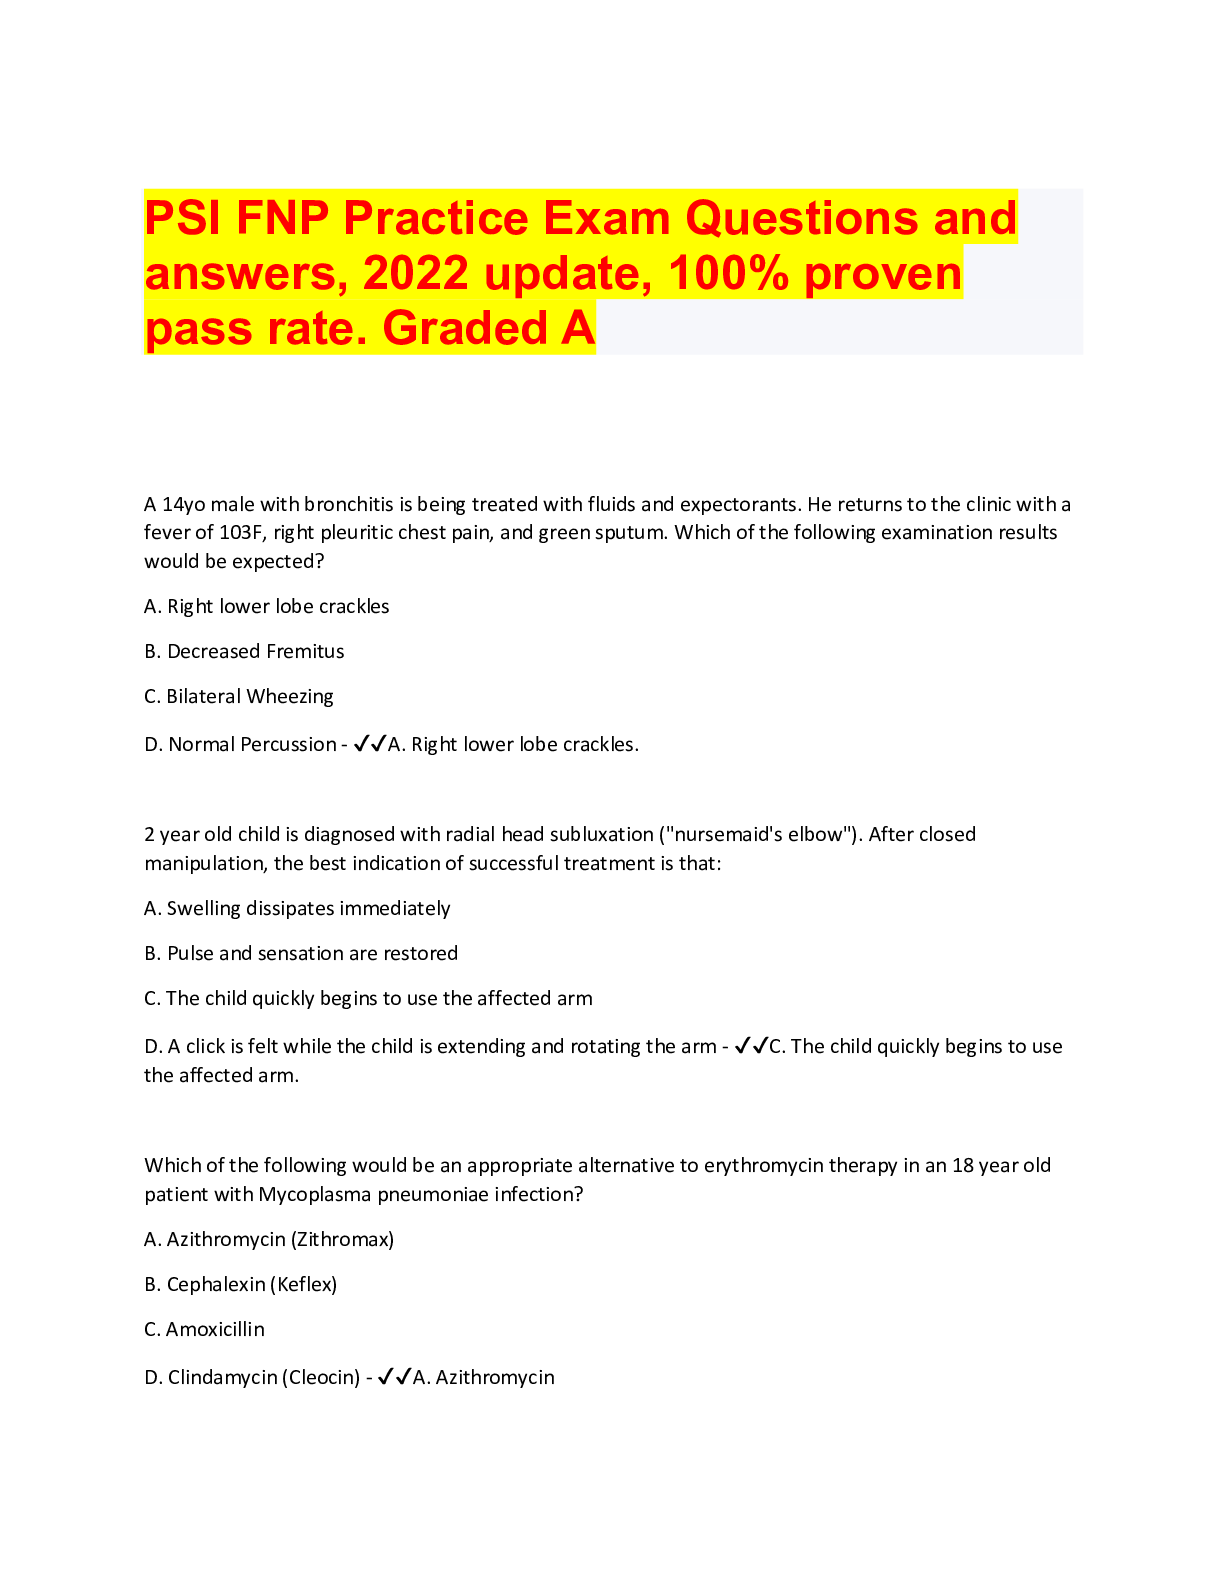 PSI FNP Practice Exam Questions and answers, 2022 update, 100 proven